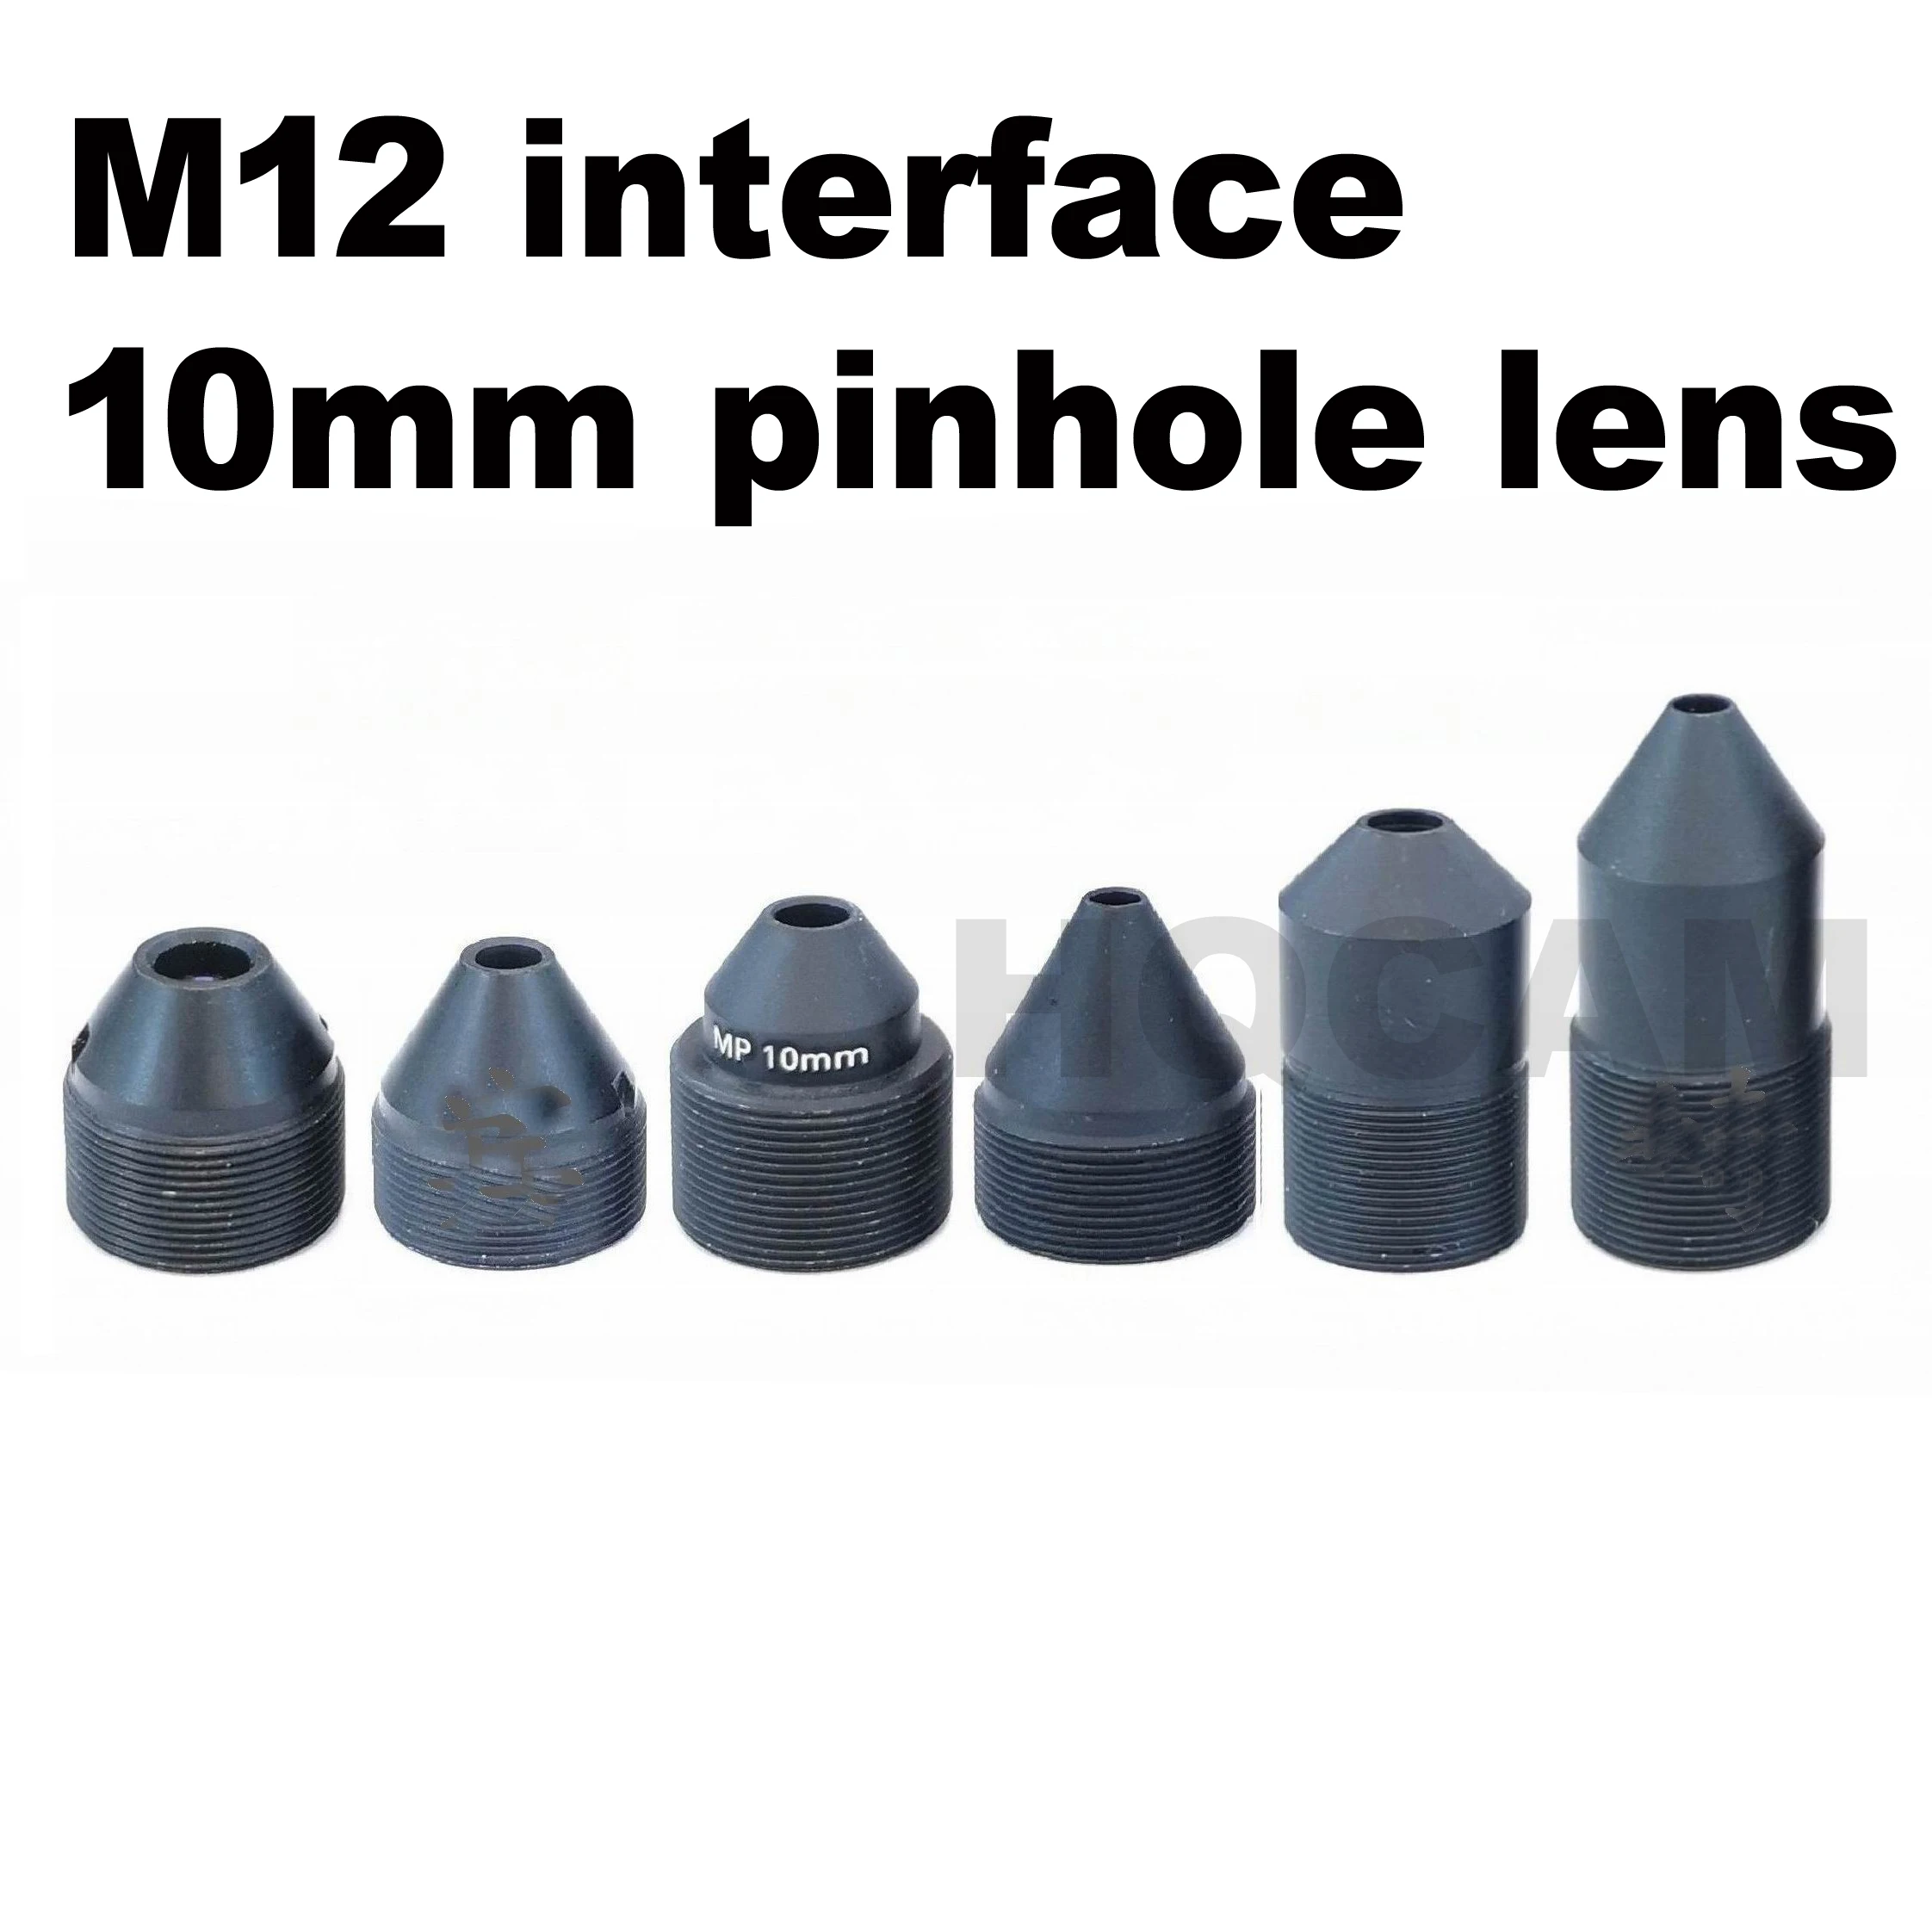 

HD 2.0Megapixel 3MP 10mm Lens M12 Pin hole Lens Built with IR Filter for Security CCTV Cameras CCD CMOS, Mount M12*P0.5, F1.6